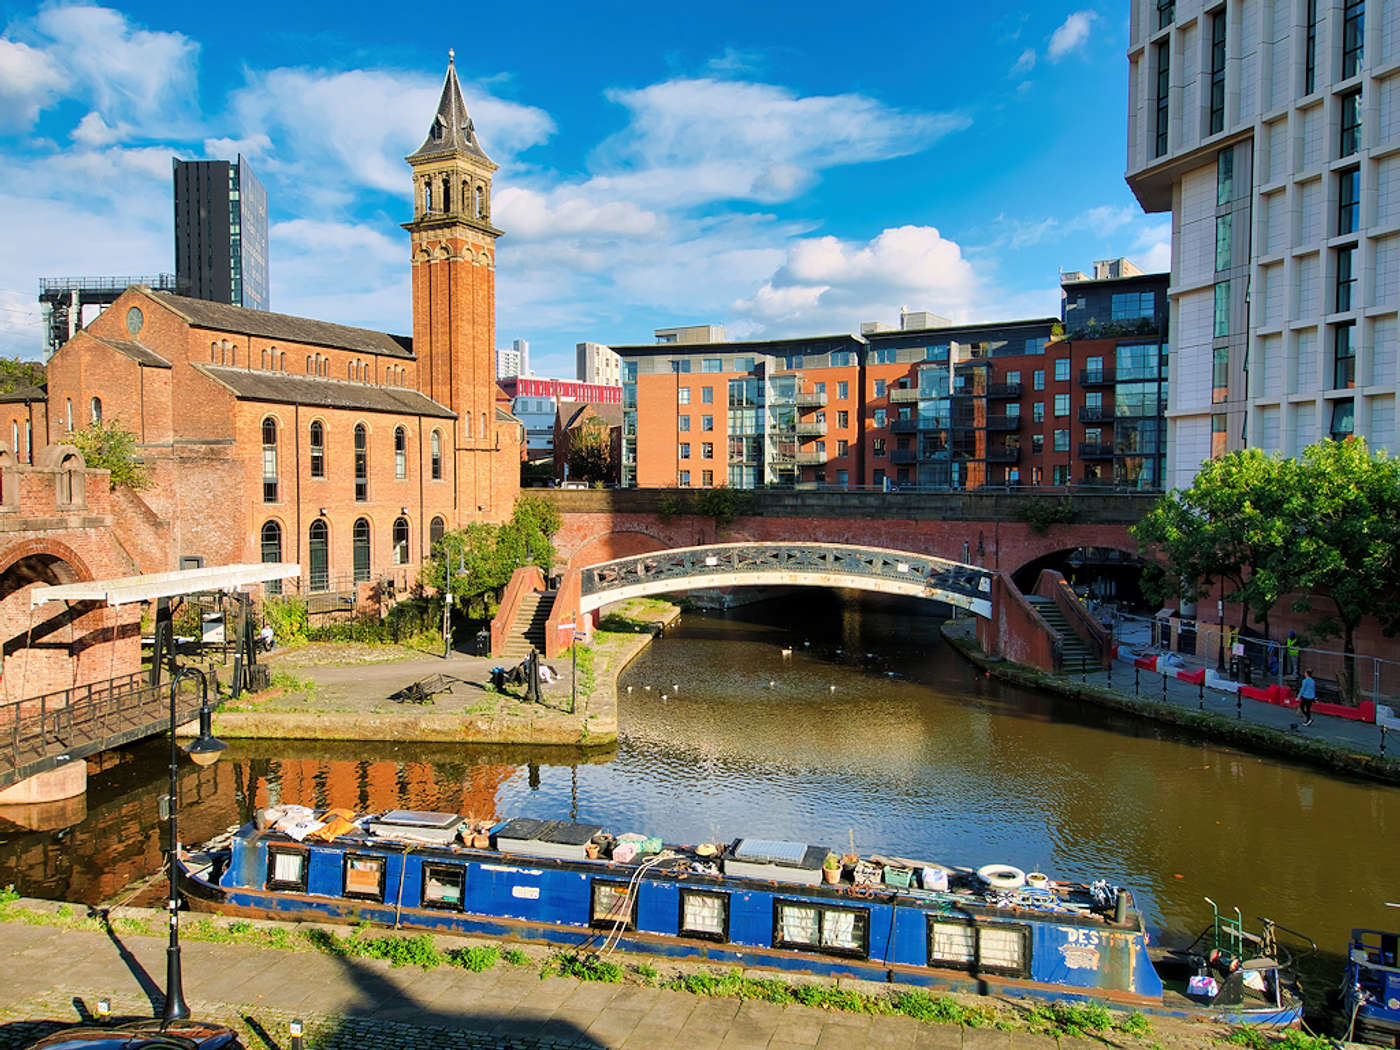 Discover your piece of Manchester.